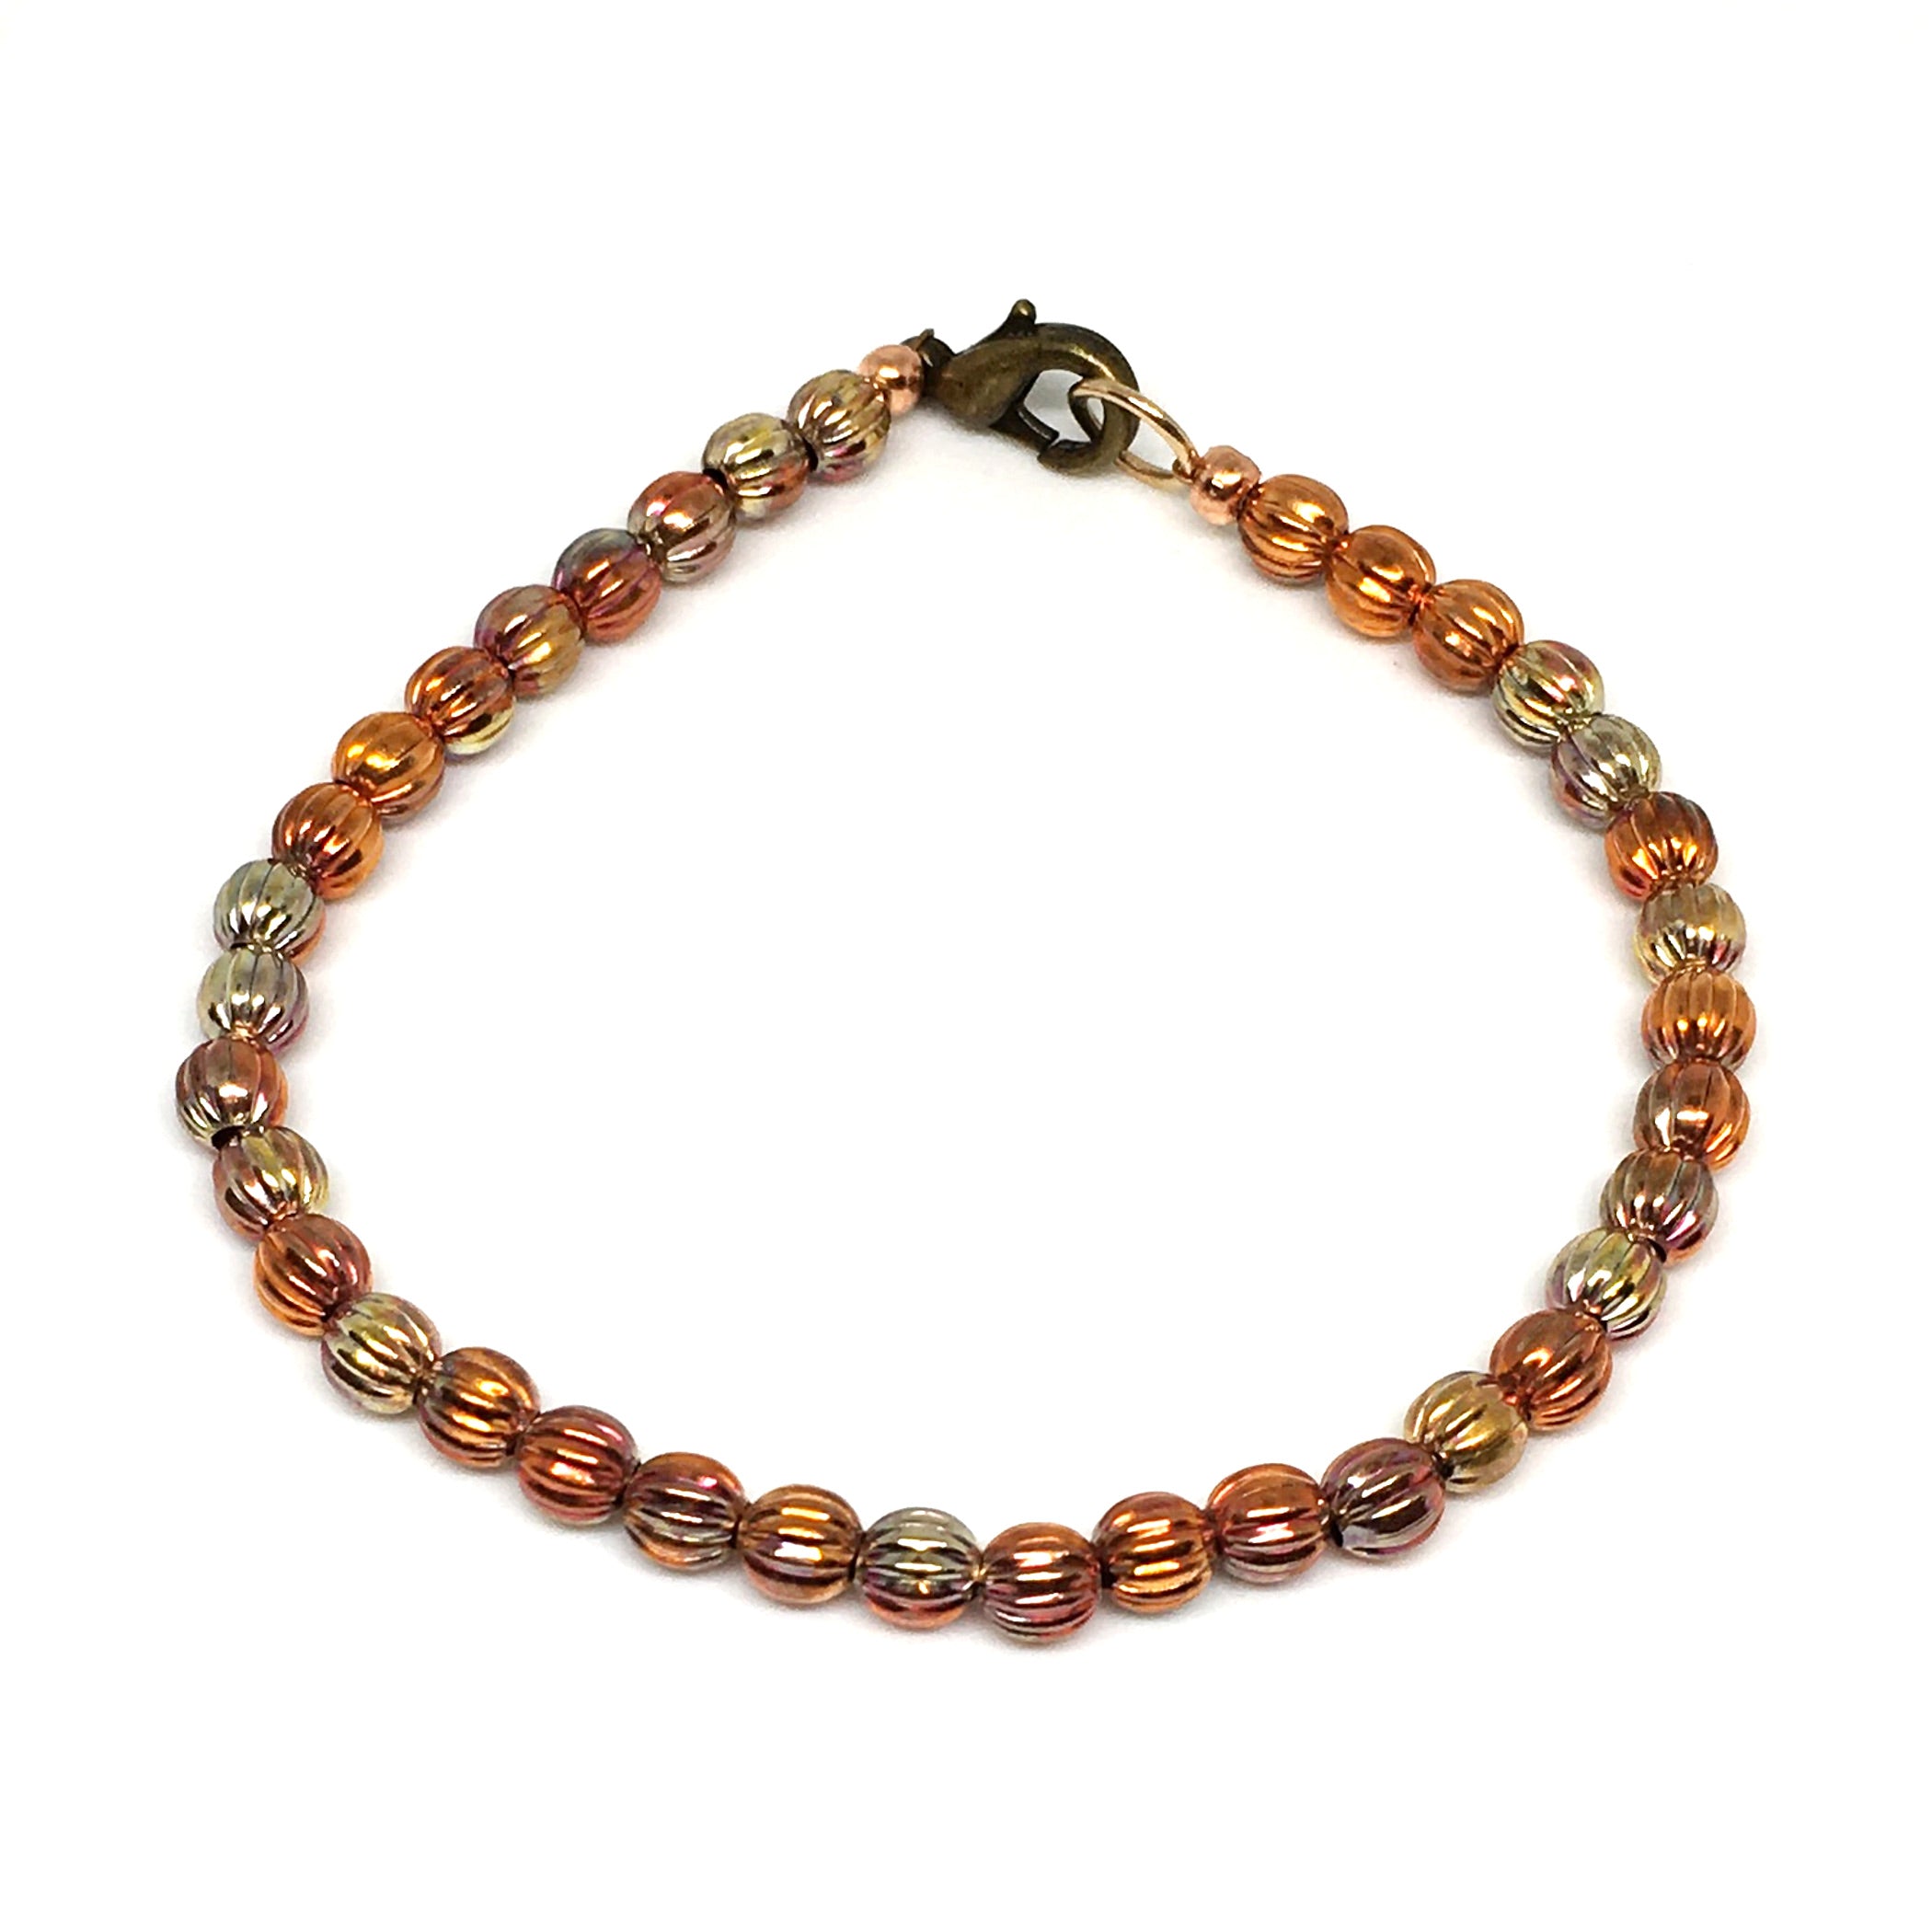 Sonoran Sunset Flame Painted Corrugated Copper Bead Bracelet - Small